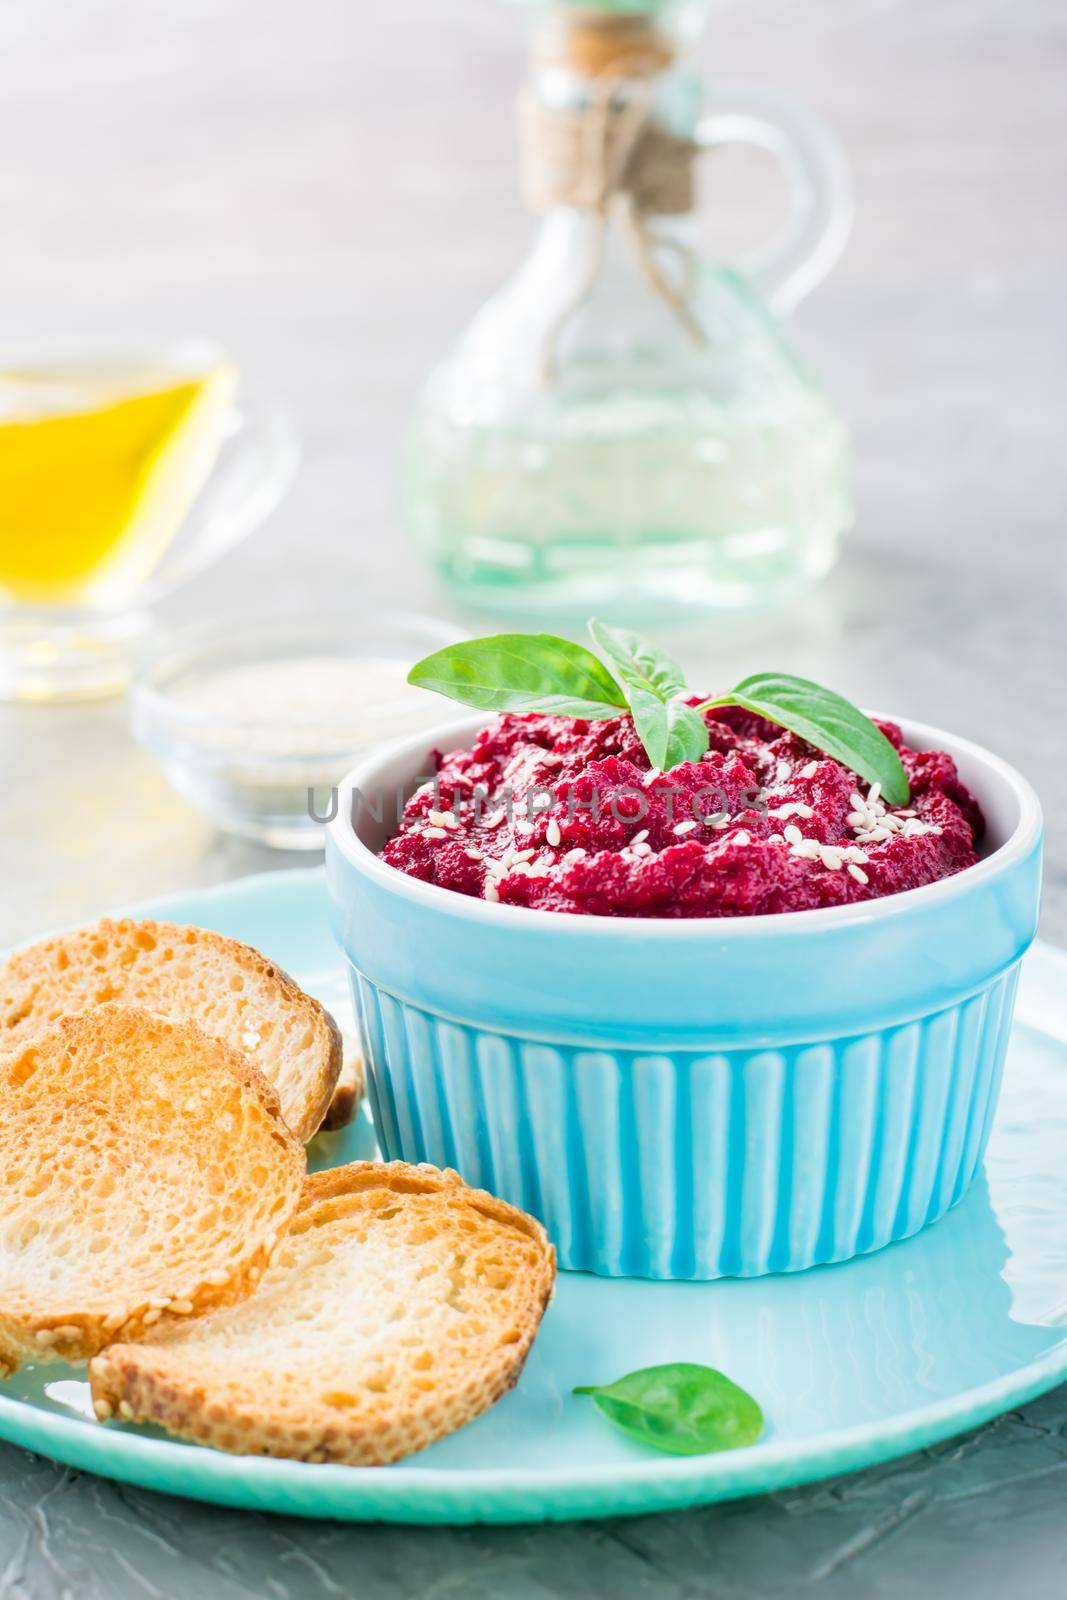 Homemade baked beetroot hummus in a bowl with sesame seeds and basil and baked small toast on a plate on the table. Vertical view